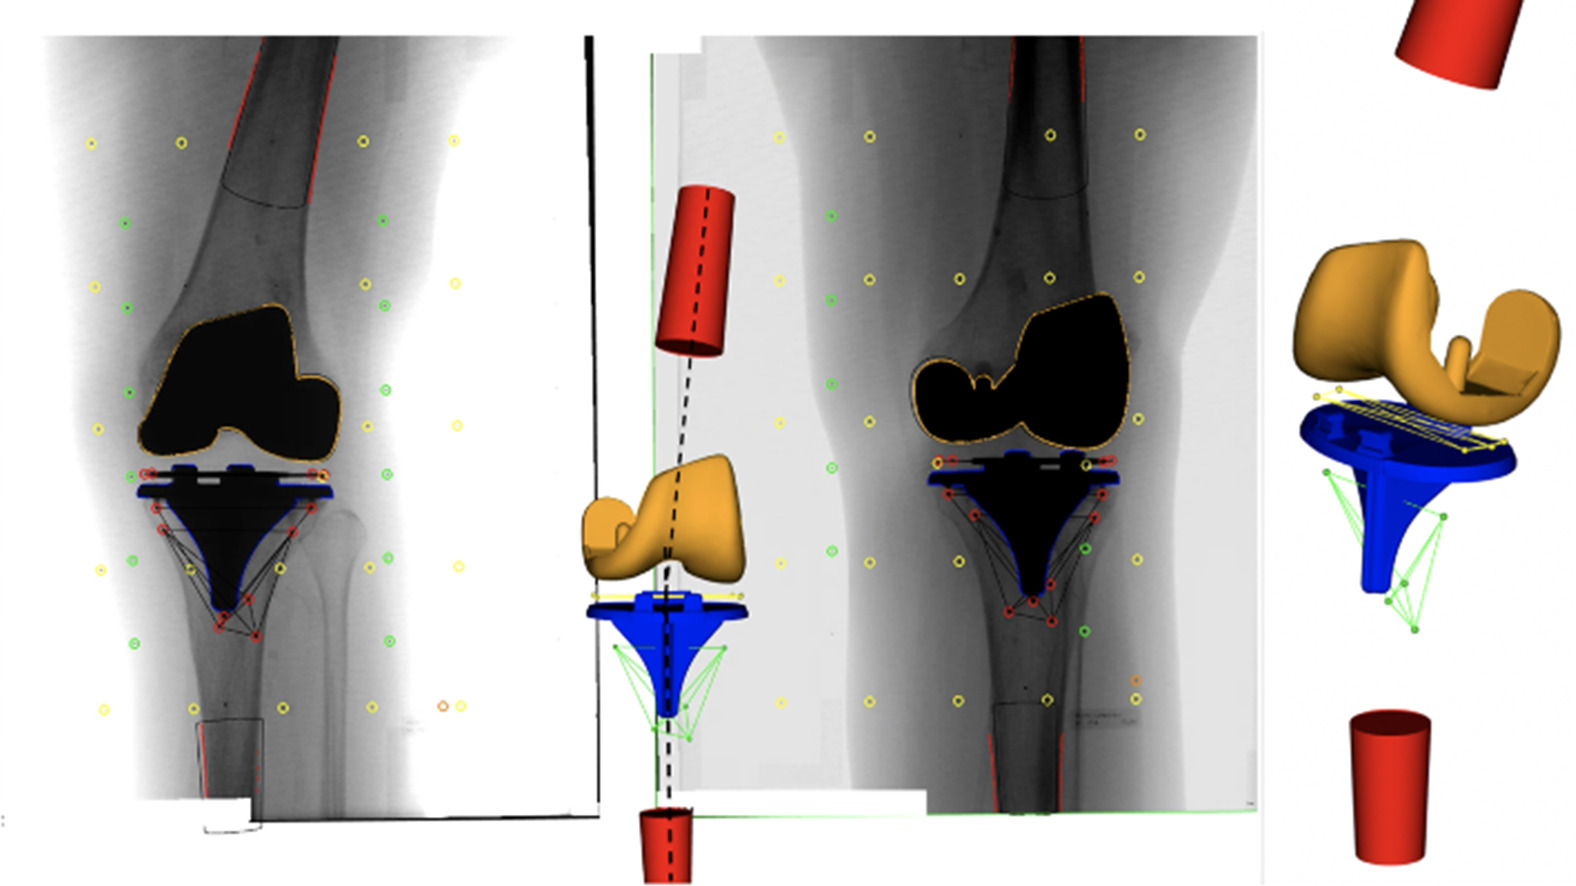 Fig. 4 
            Stereoradiograph with projections of the surfaces of the femoral (orange) and tibial (blue) components, the tantalum markers in the polyethylene inlay (yellow marker model), and in the tibial bone (green marker model). The red cones represent the femur and tibia bones and their coordinate systems (y-axis) for estimation of the anatomical knee axis.
          